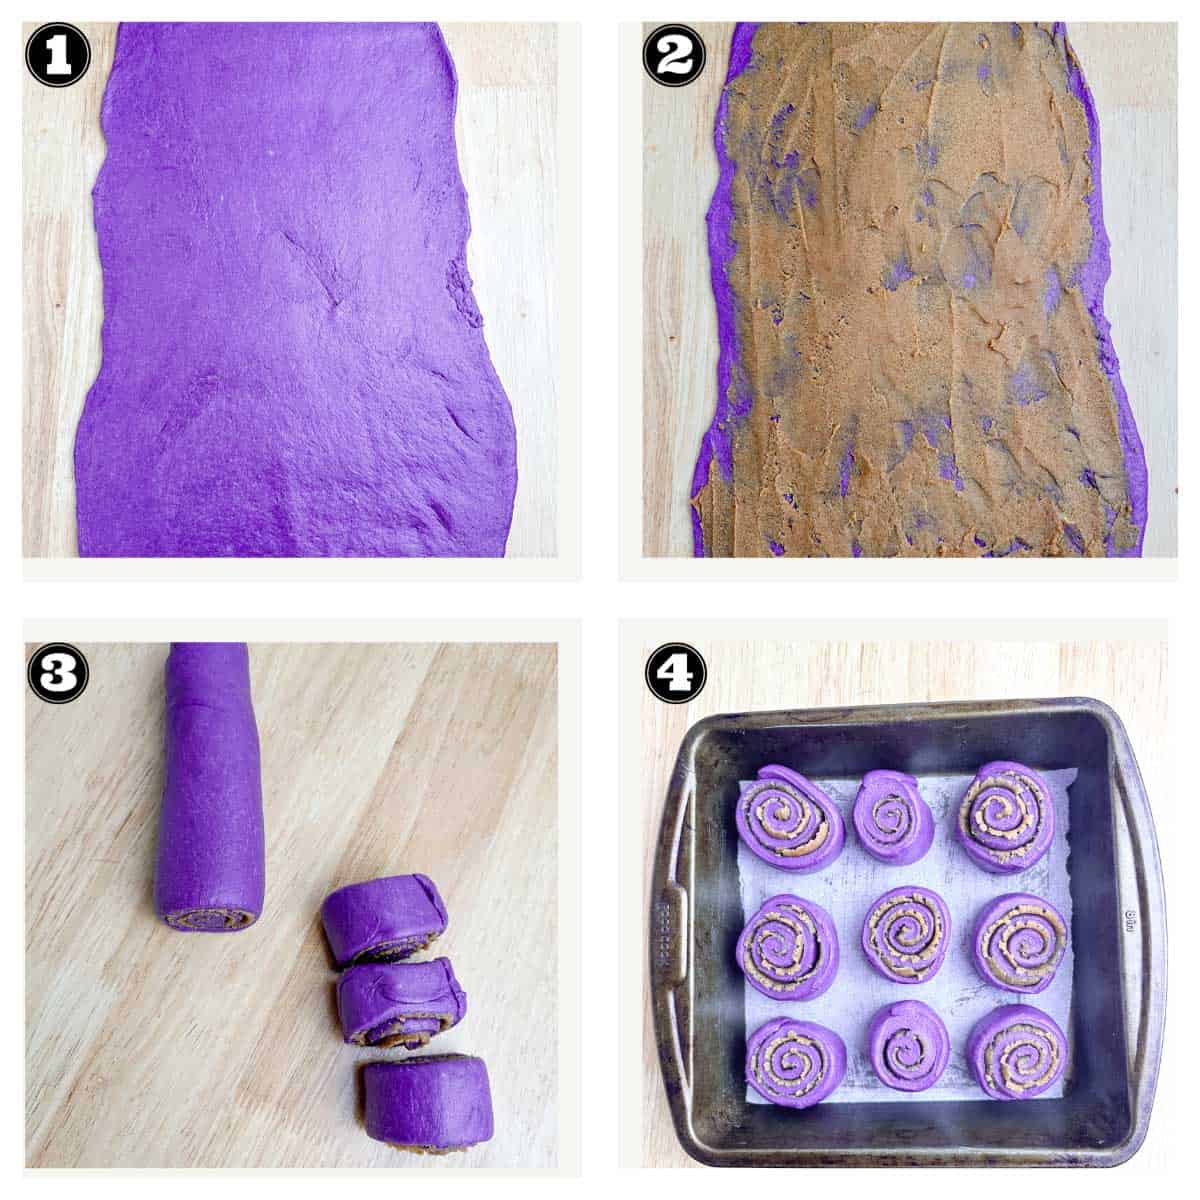 images of rolling the dough and spreading cinnamon sugar on ube dough